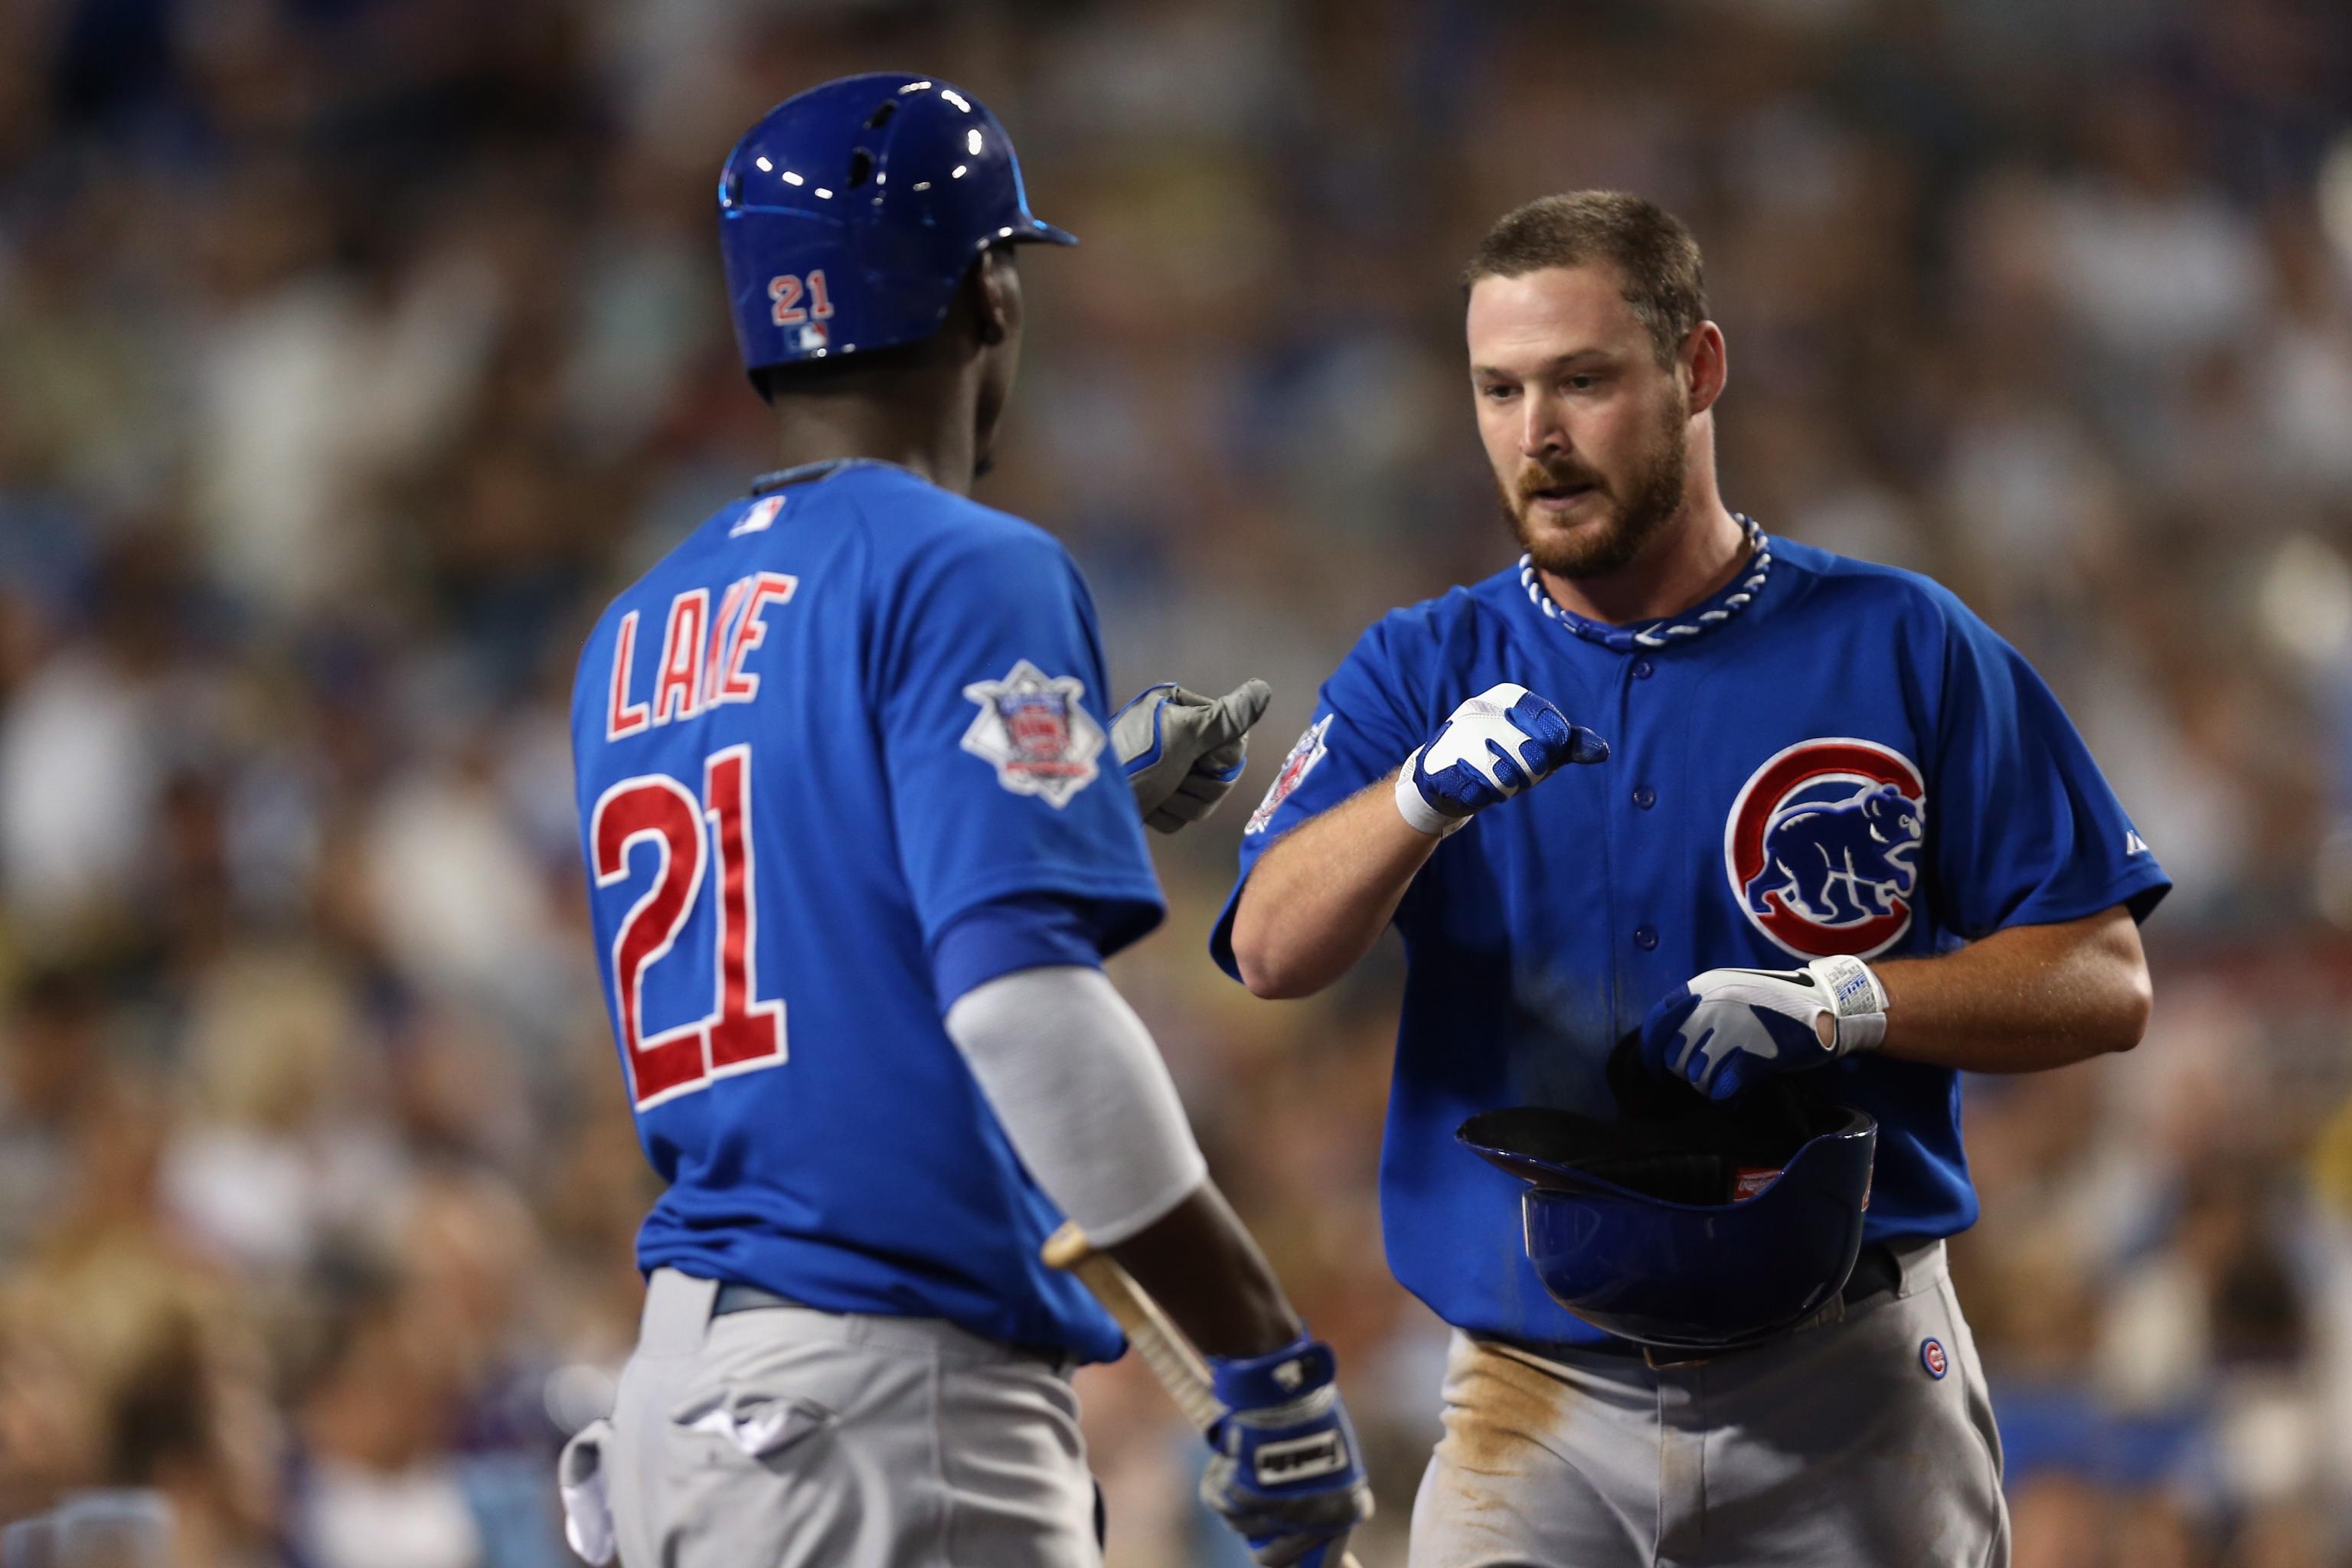 Cubs Bullpen Notes: Bringing Up Young Starters Into the Big League